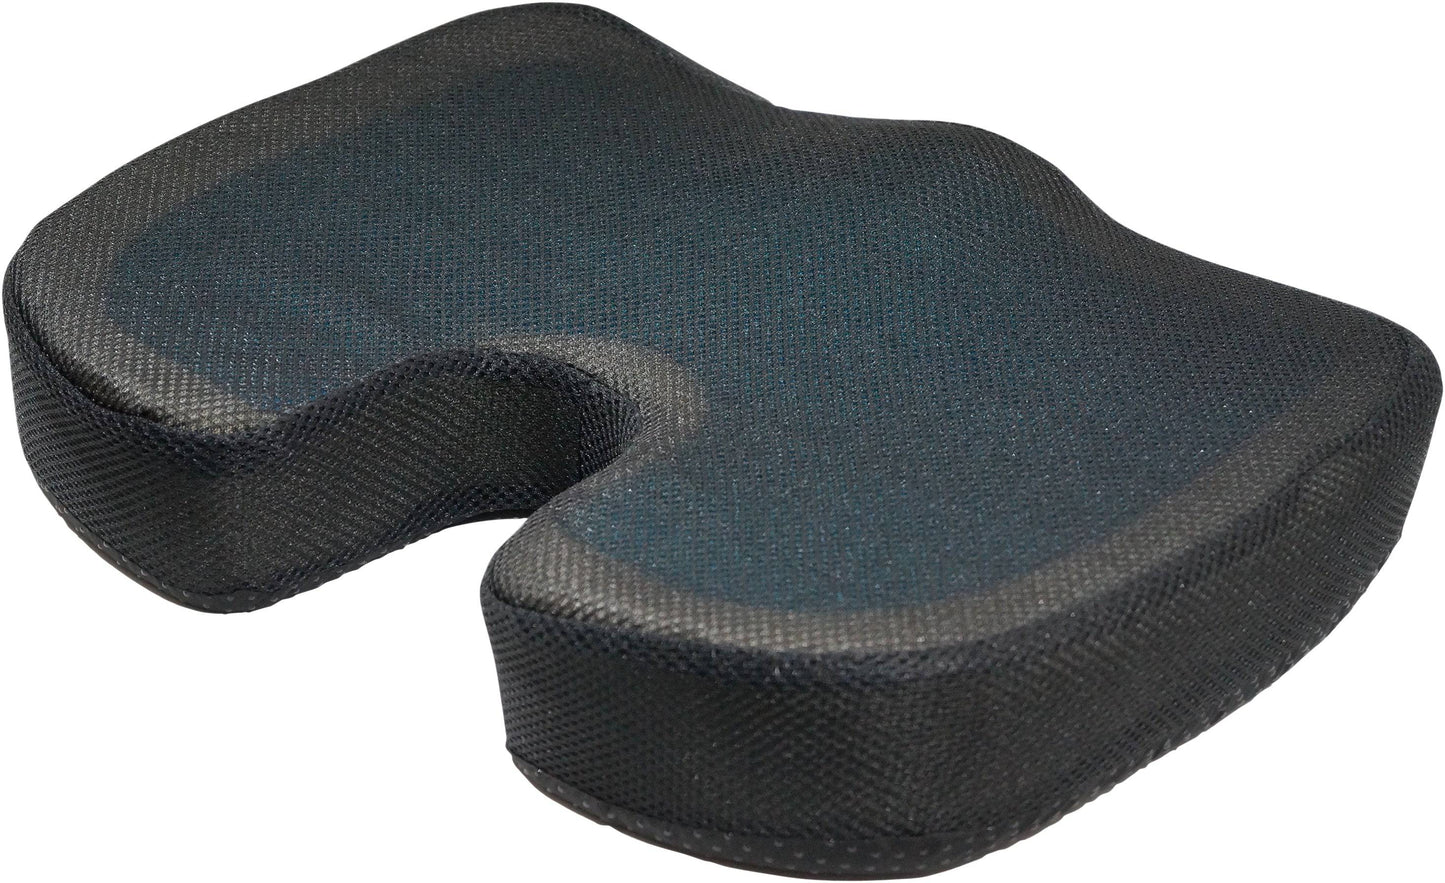 Aidapt Deluxe Pressure Relief Coccyx Cushion with Gel